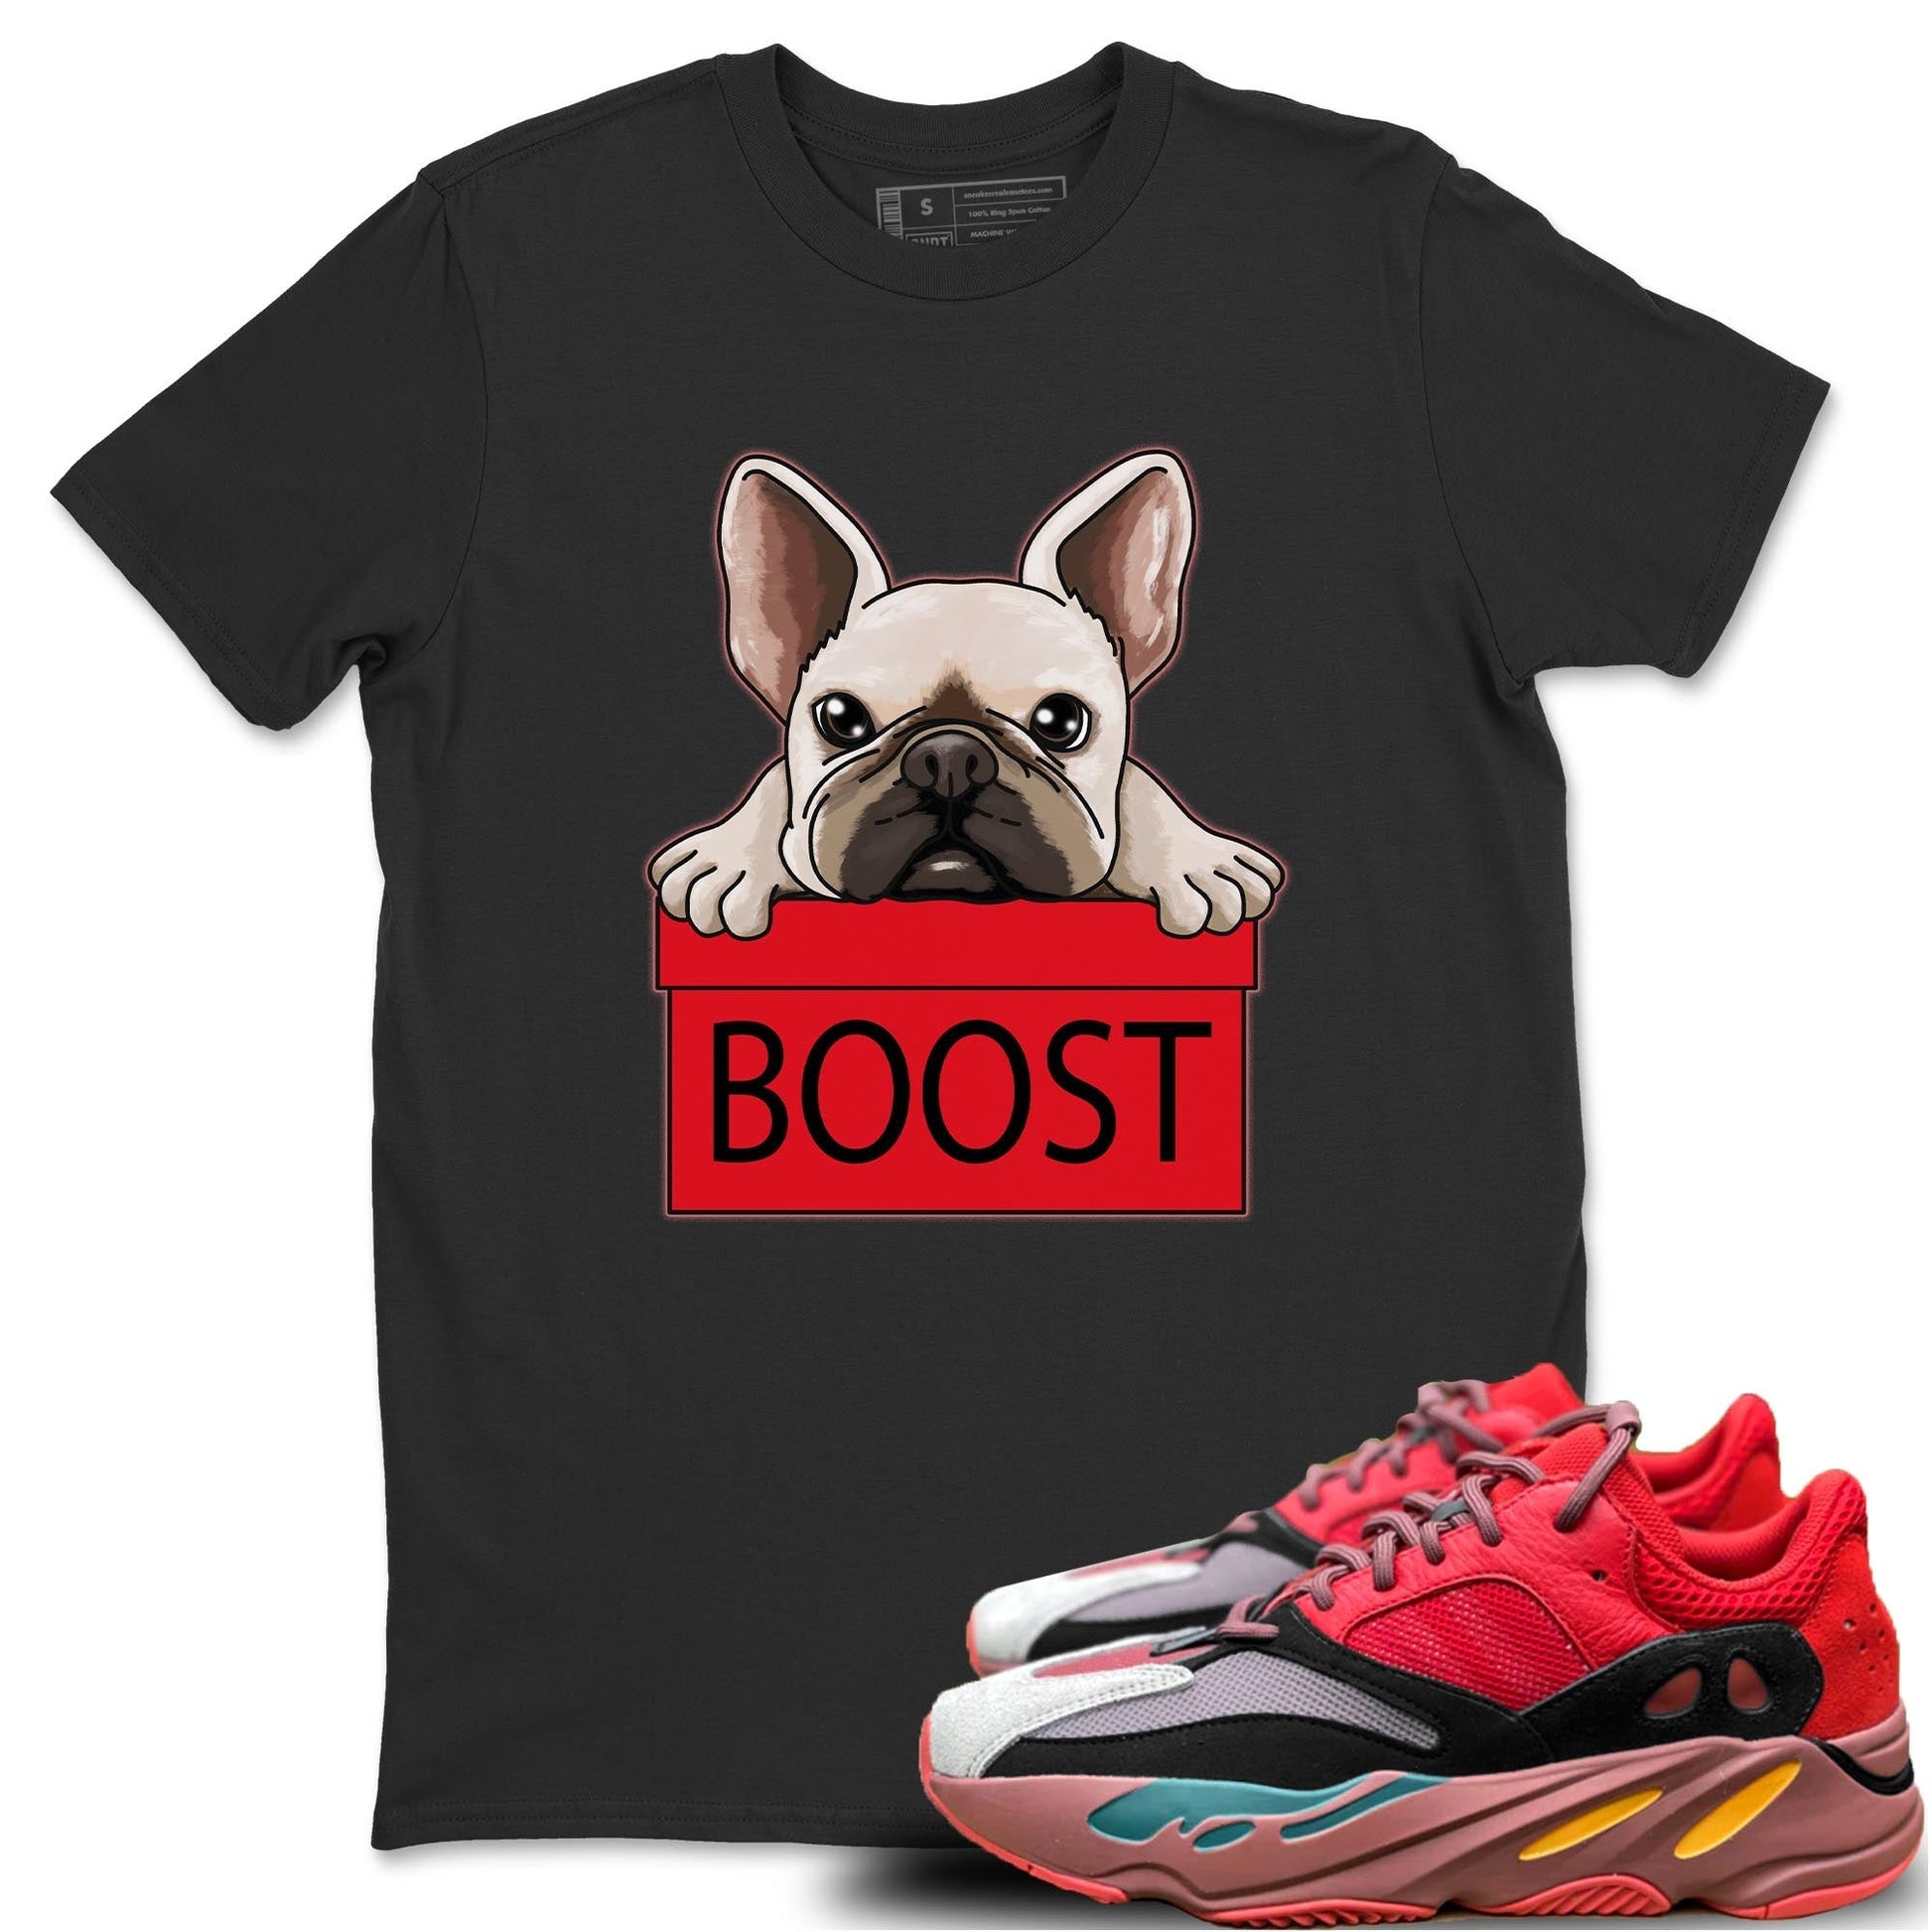 Yeezy 700 Hi-Res Red Sneaker Match Tees French Bulldog Sneaker Tees Yeezy 700 Hi-Res Red Sneaker Release Tees Unisex Shirts